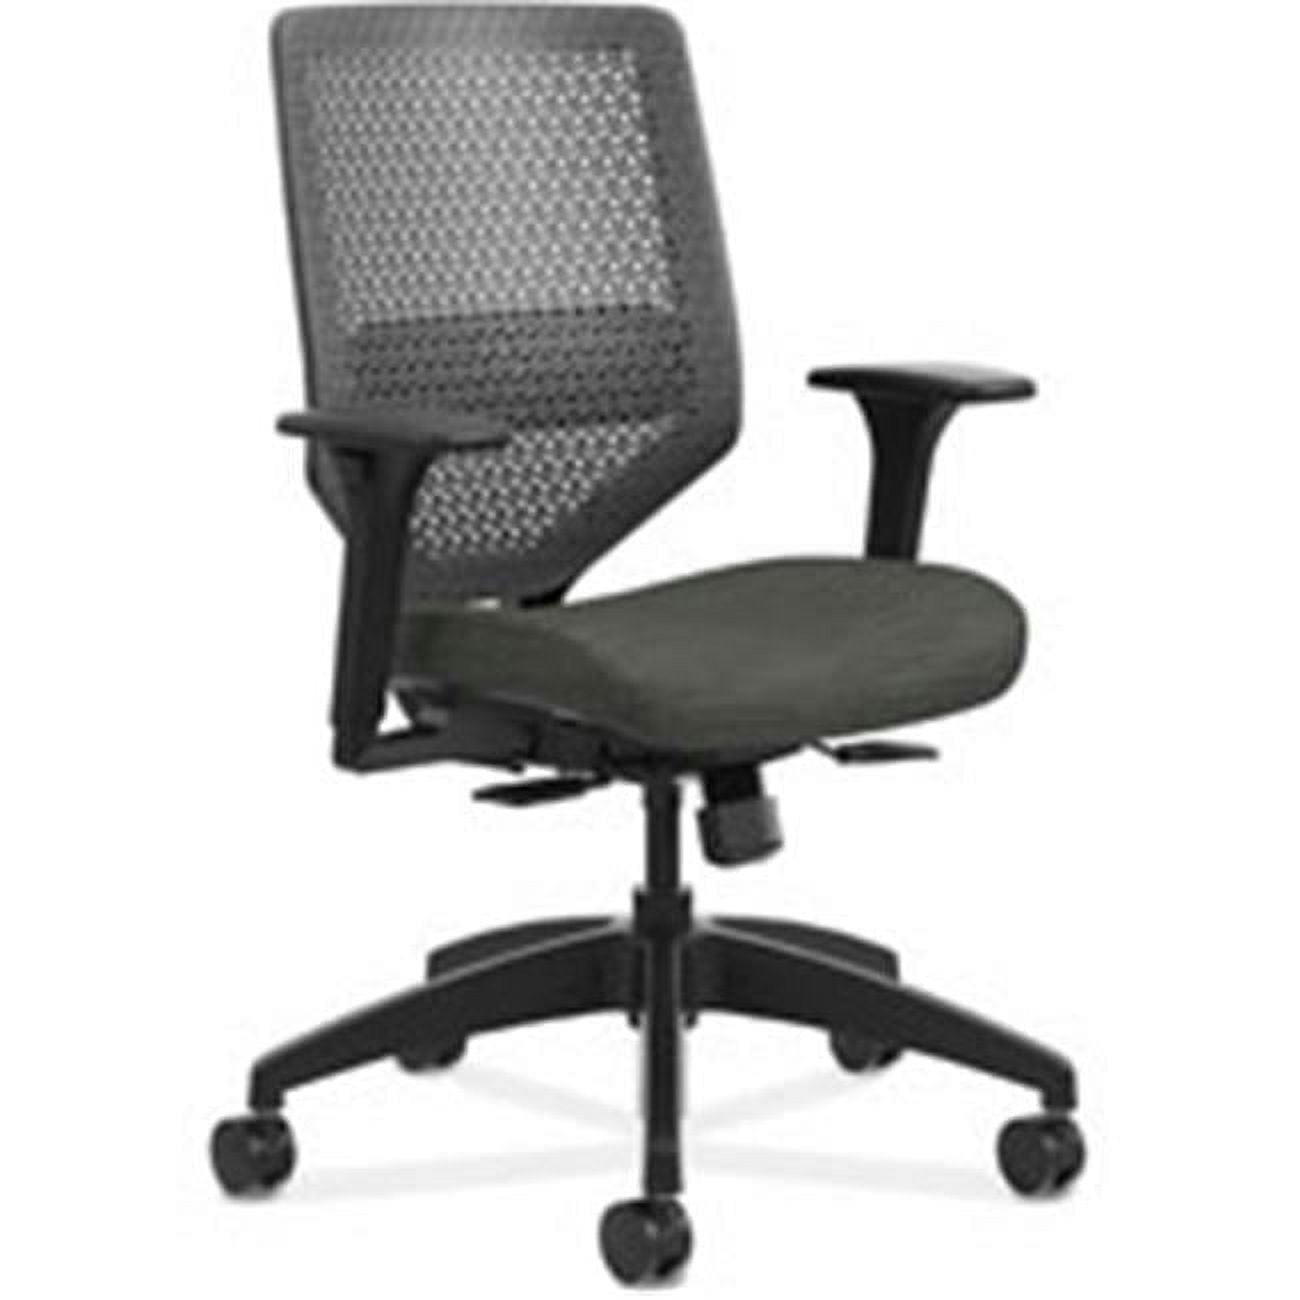 Midnight Black Mesh Swivel Task Chair with Adjustable Arms